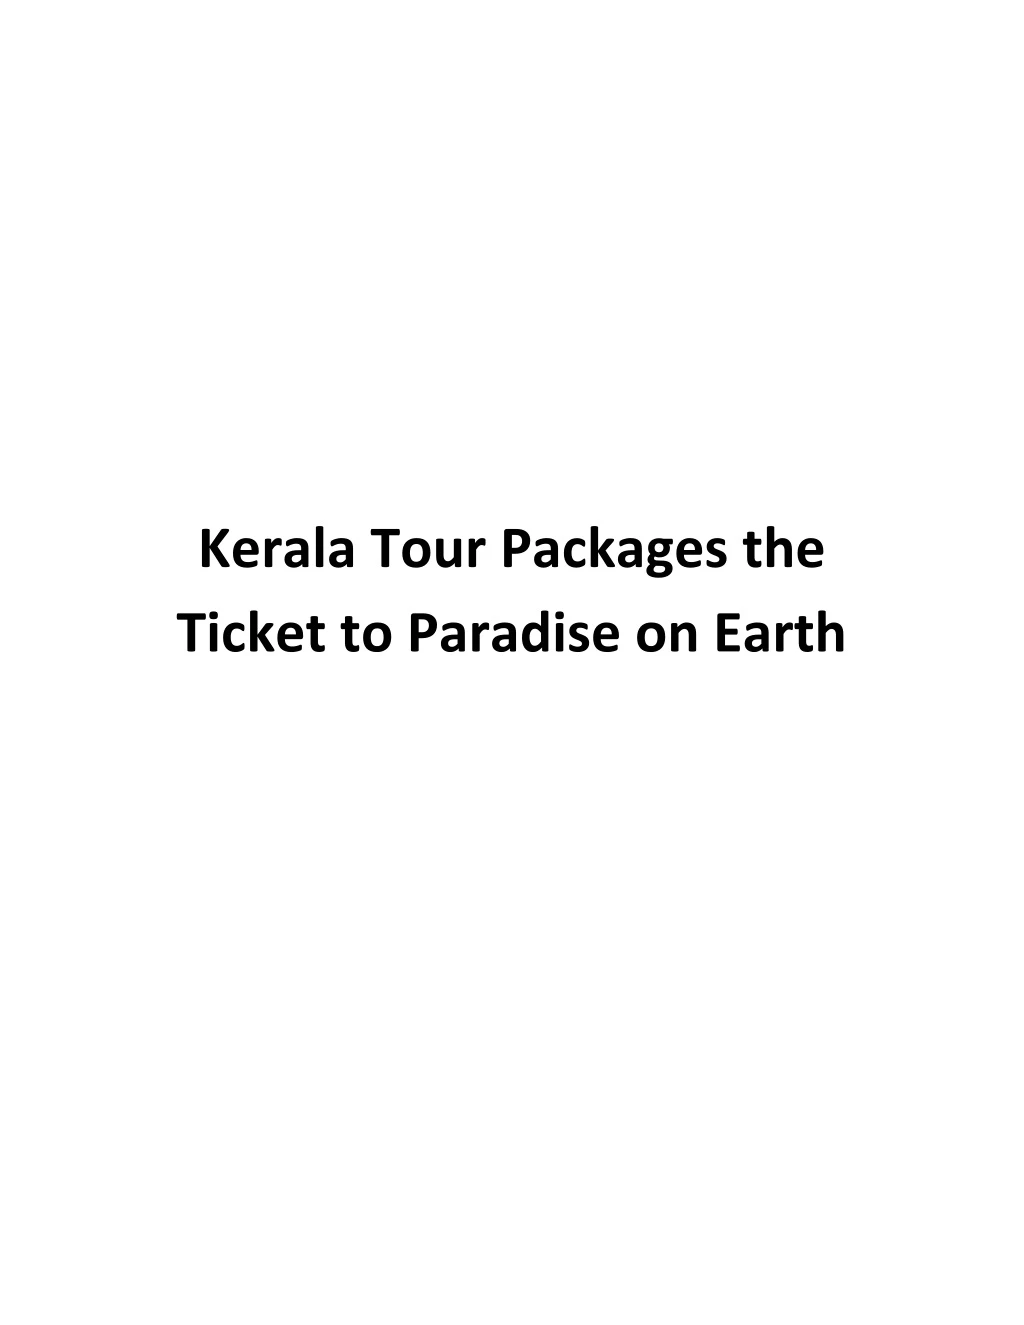 kerala tour packages the ticket to paradise